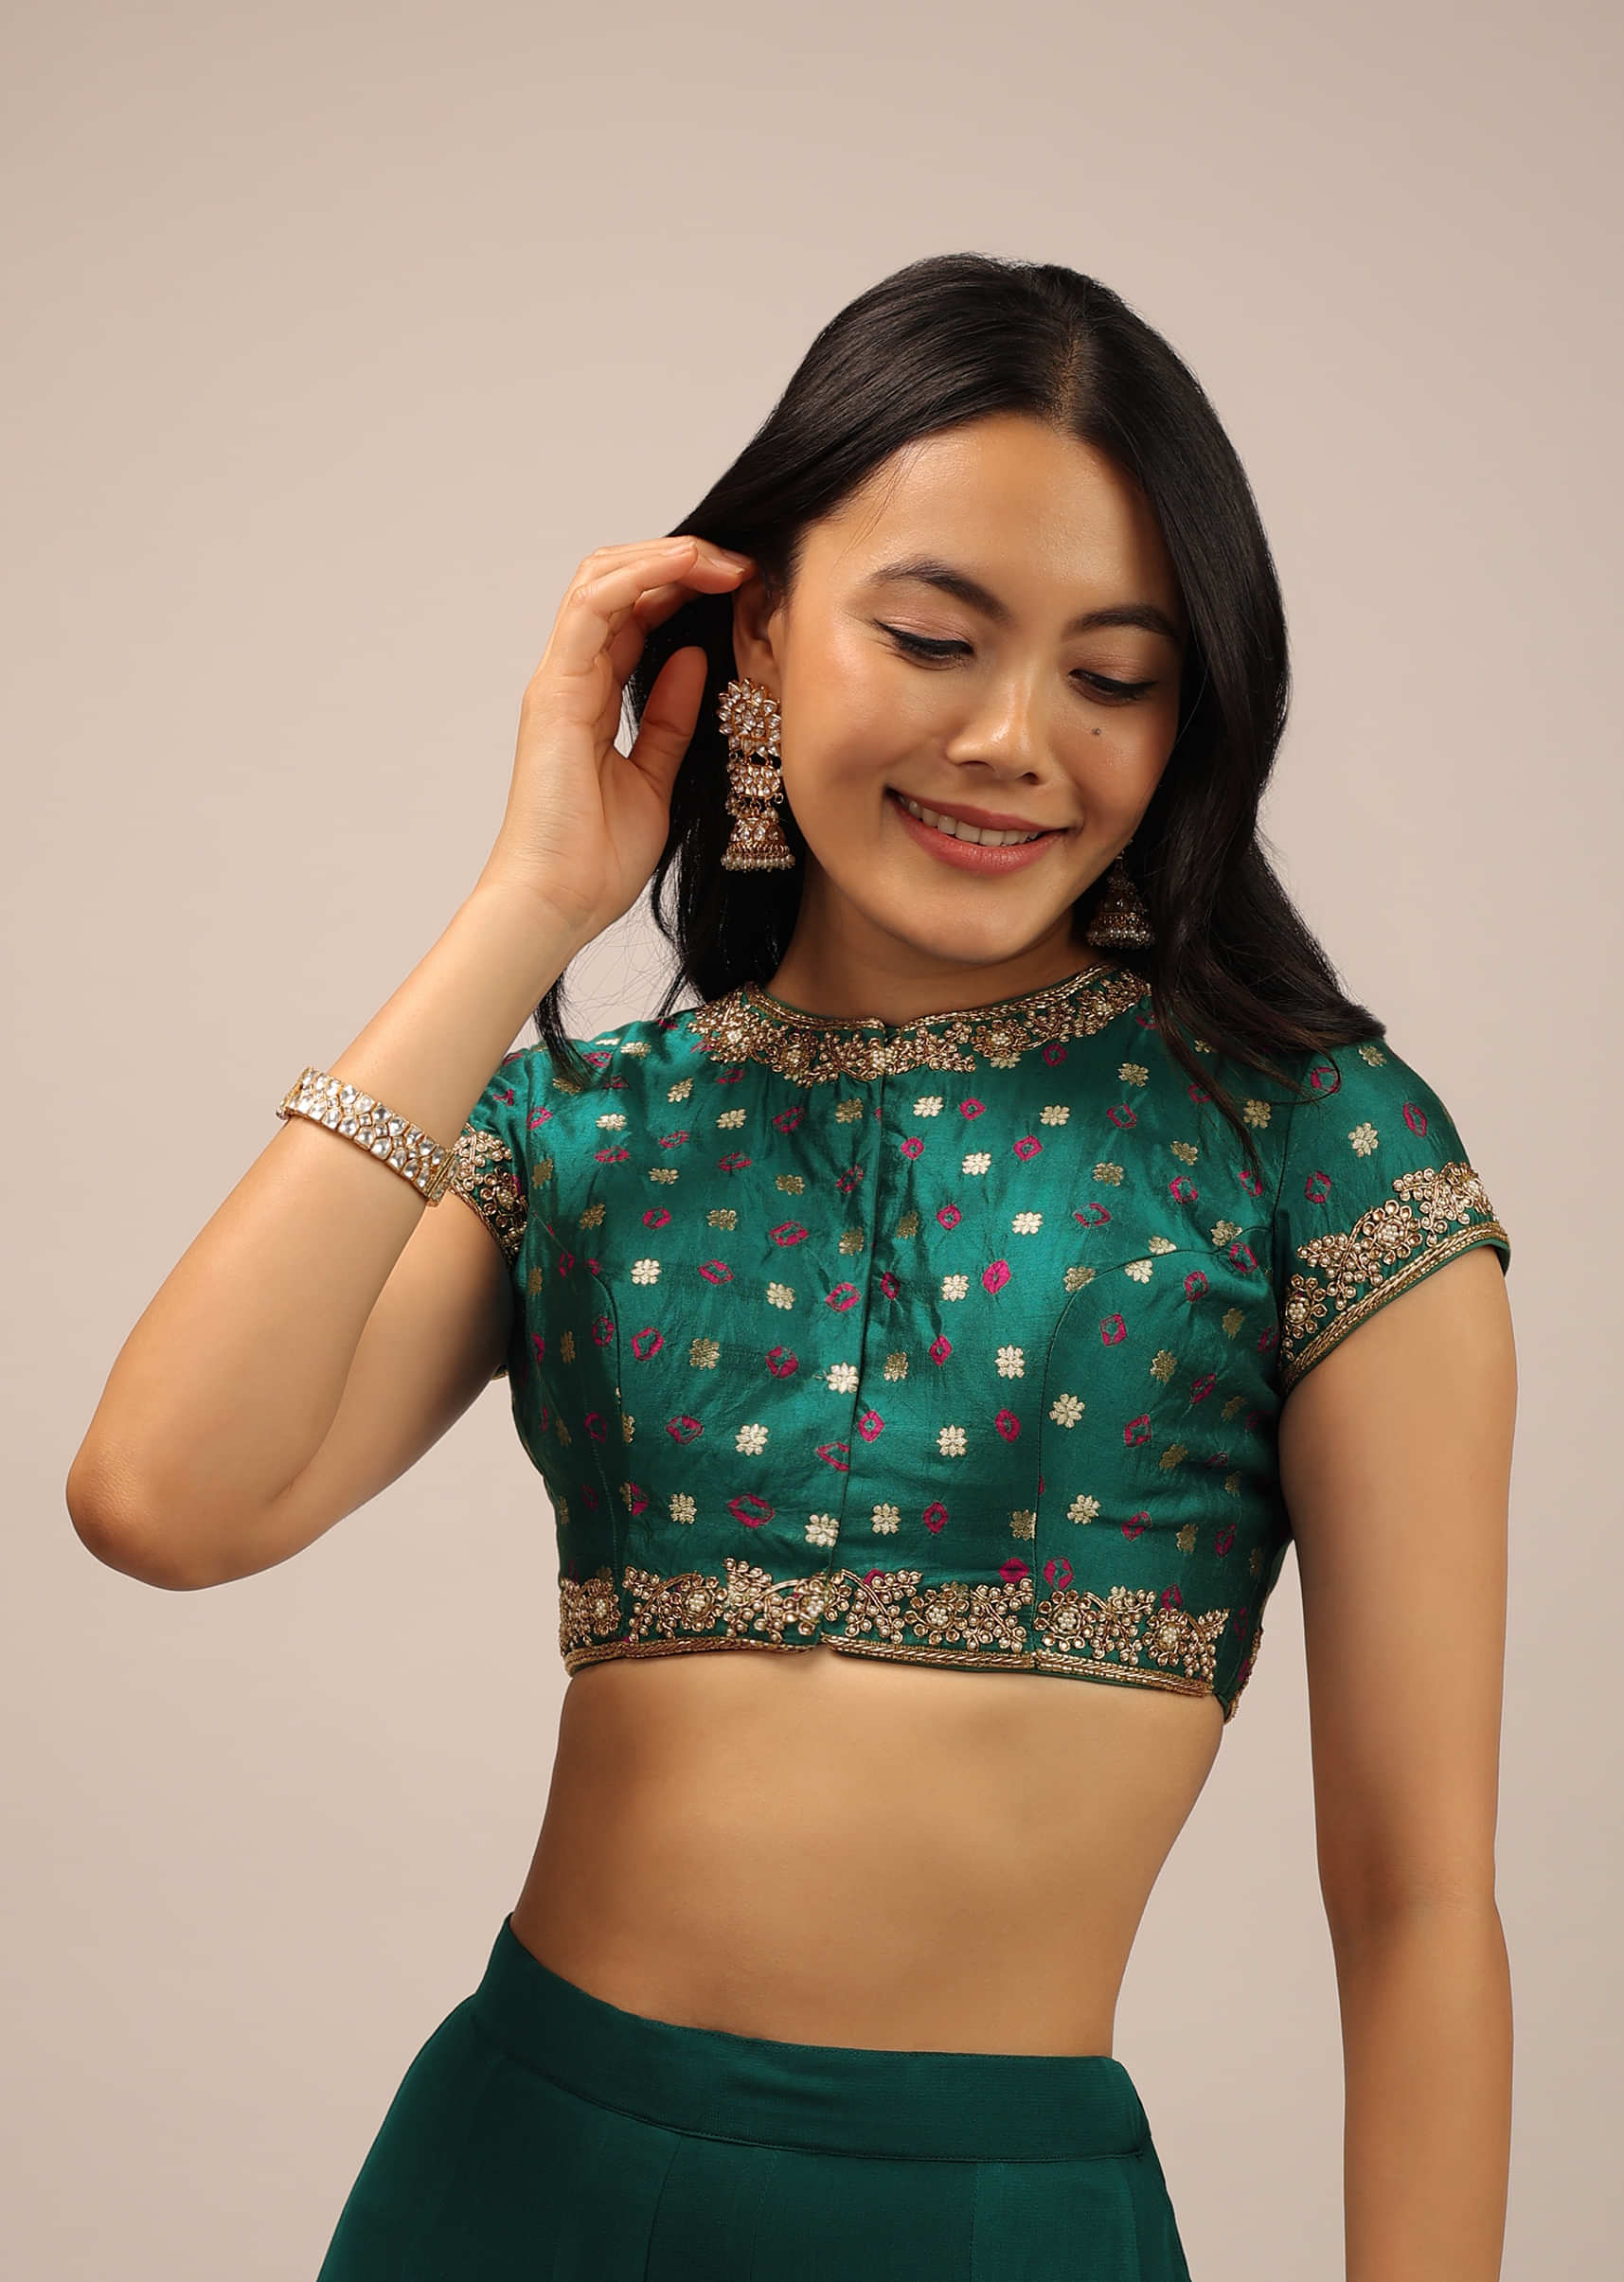 Teal Blouse In Brocade With Woven Buttis, Bandhani And Zardosi Embroidery